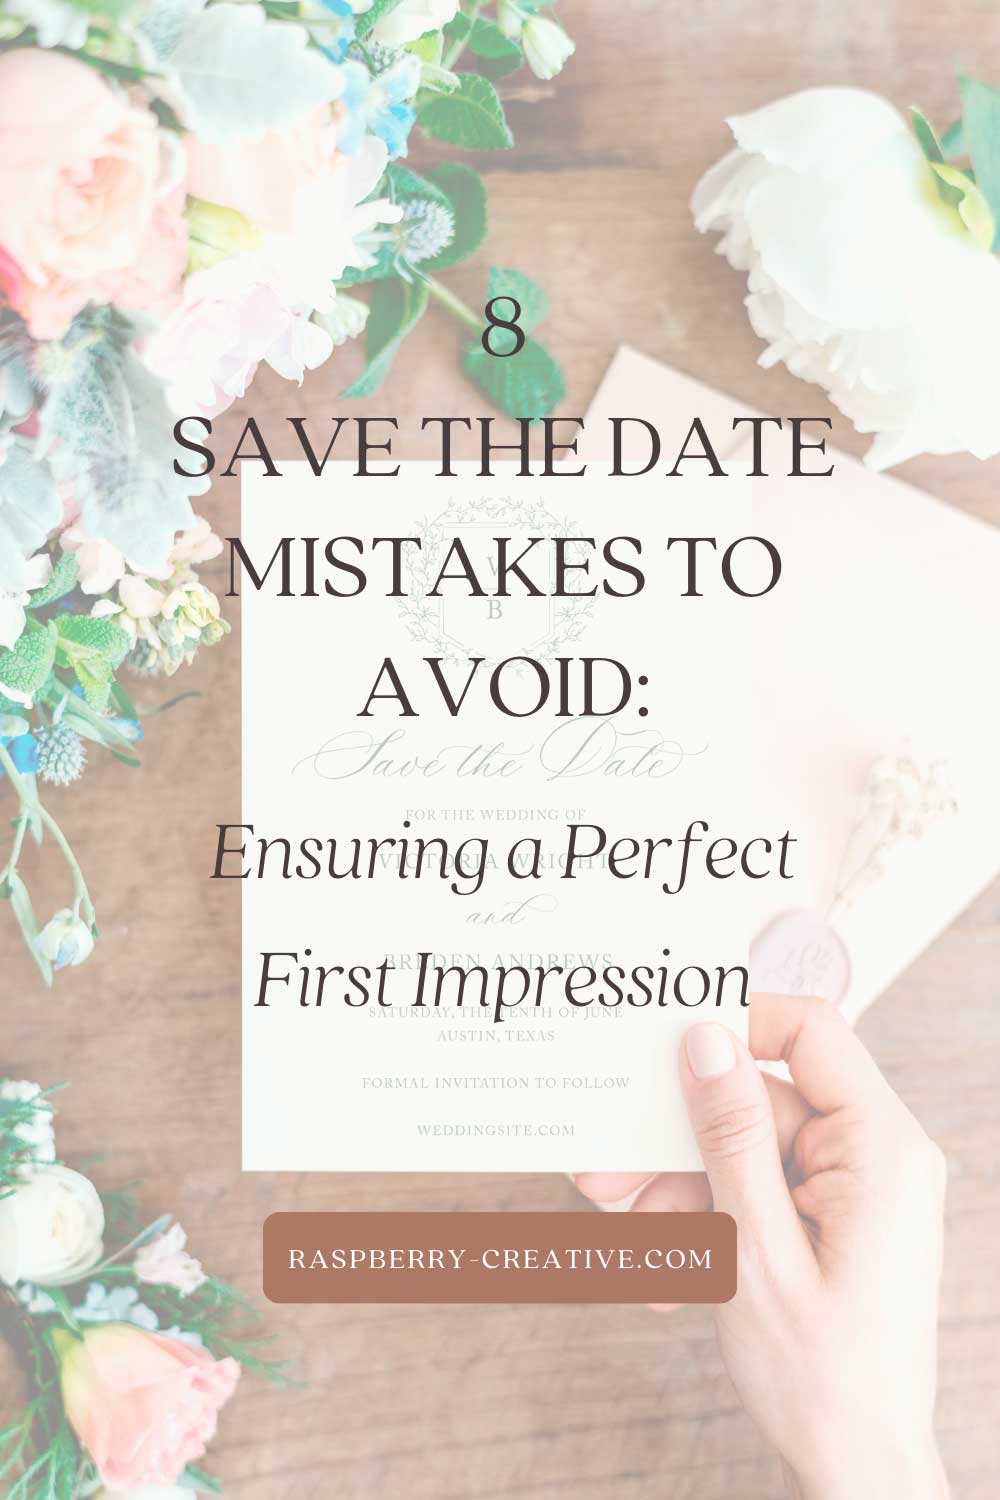 8 Save the Date Mistakes to Avoid: Ensuring a Perfect First Impression